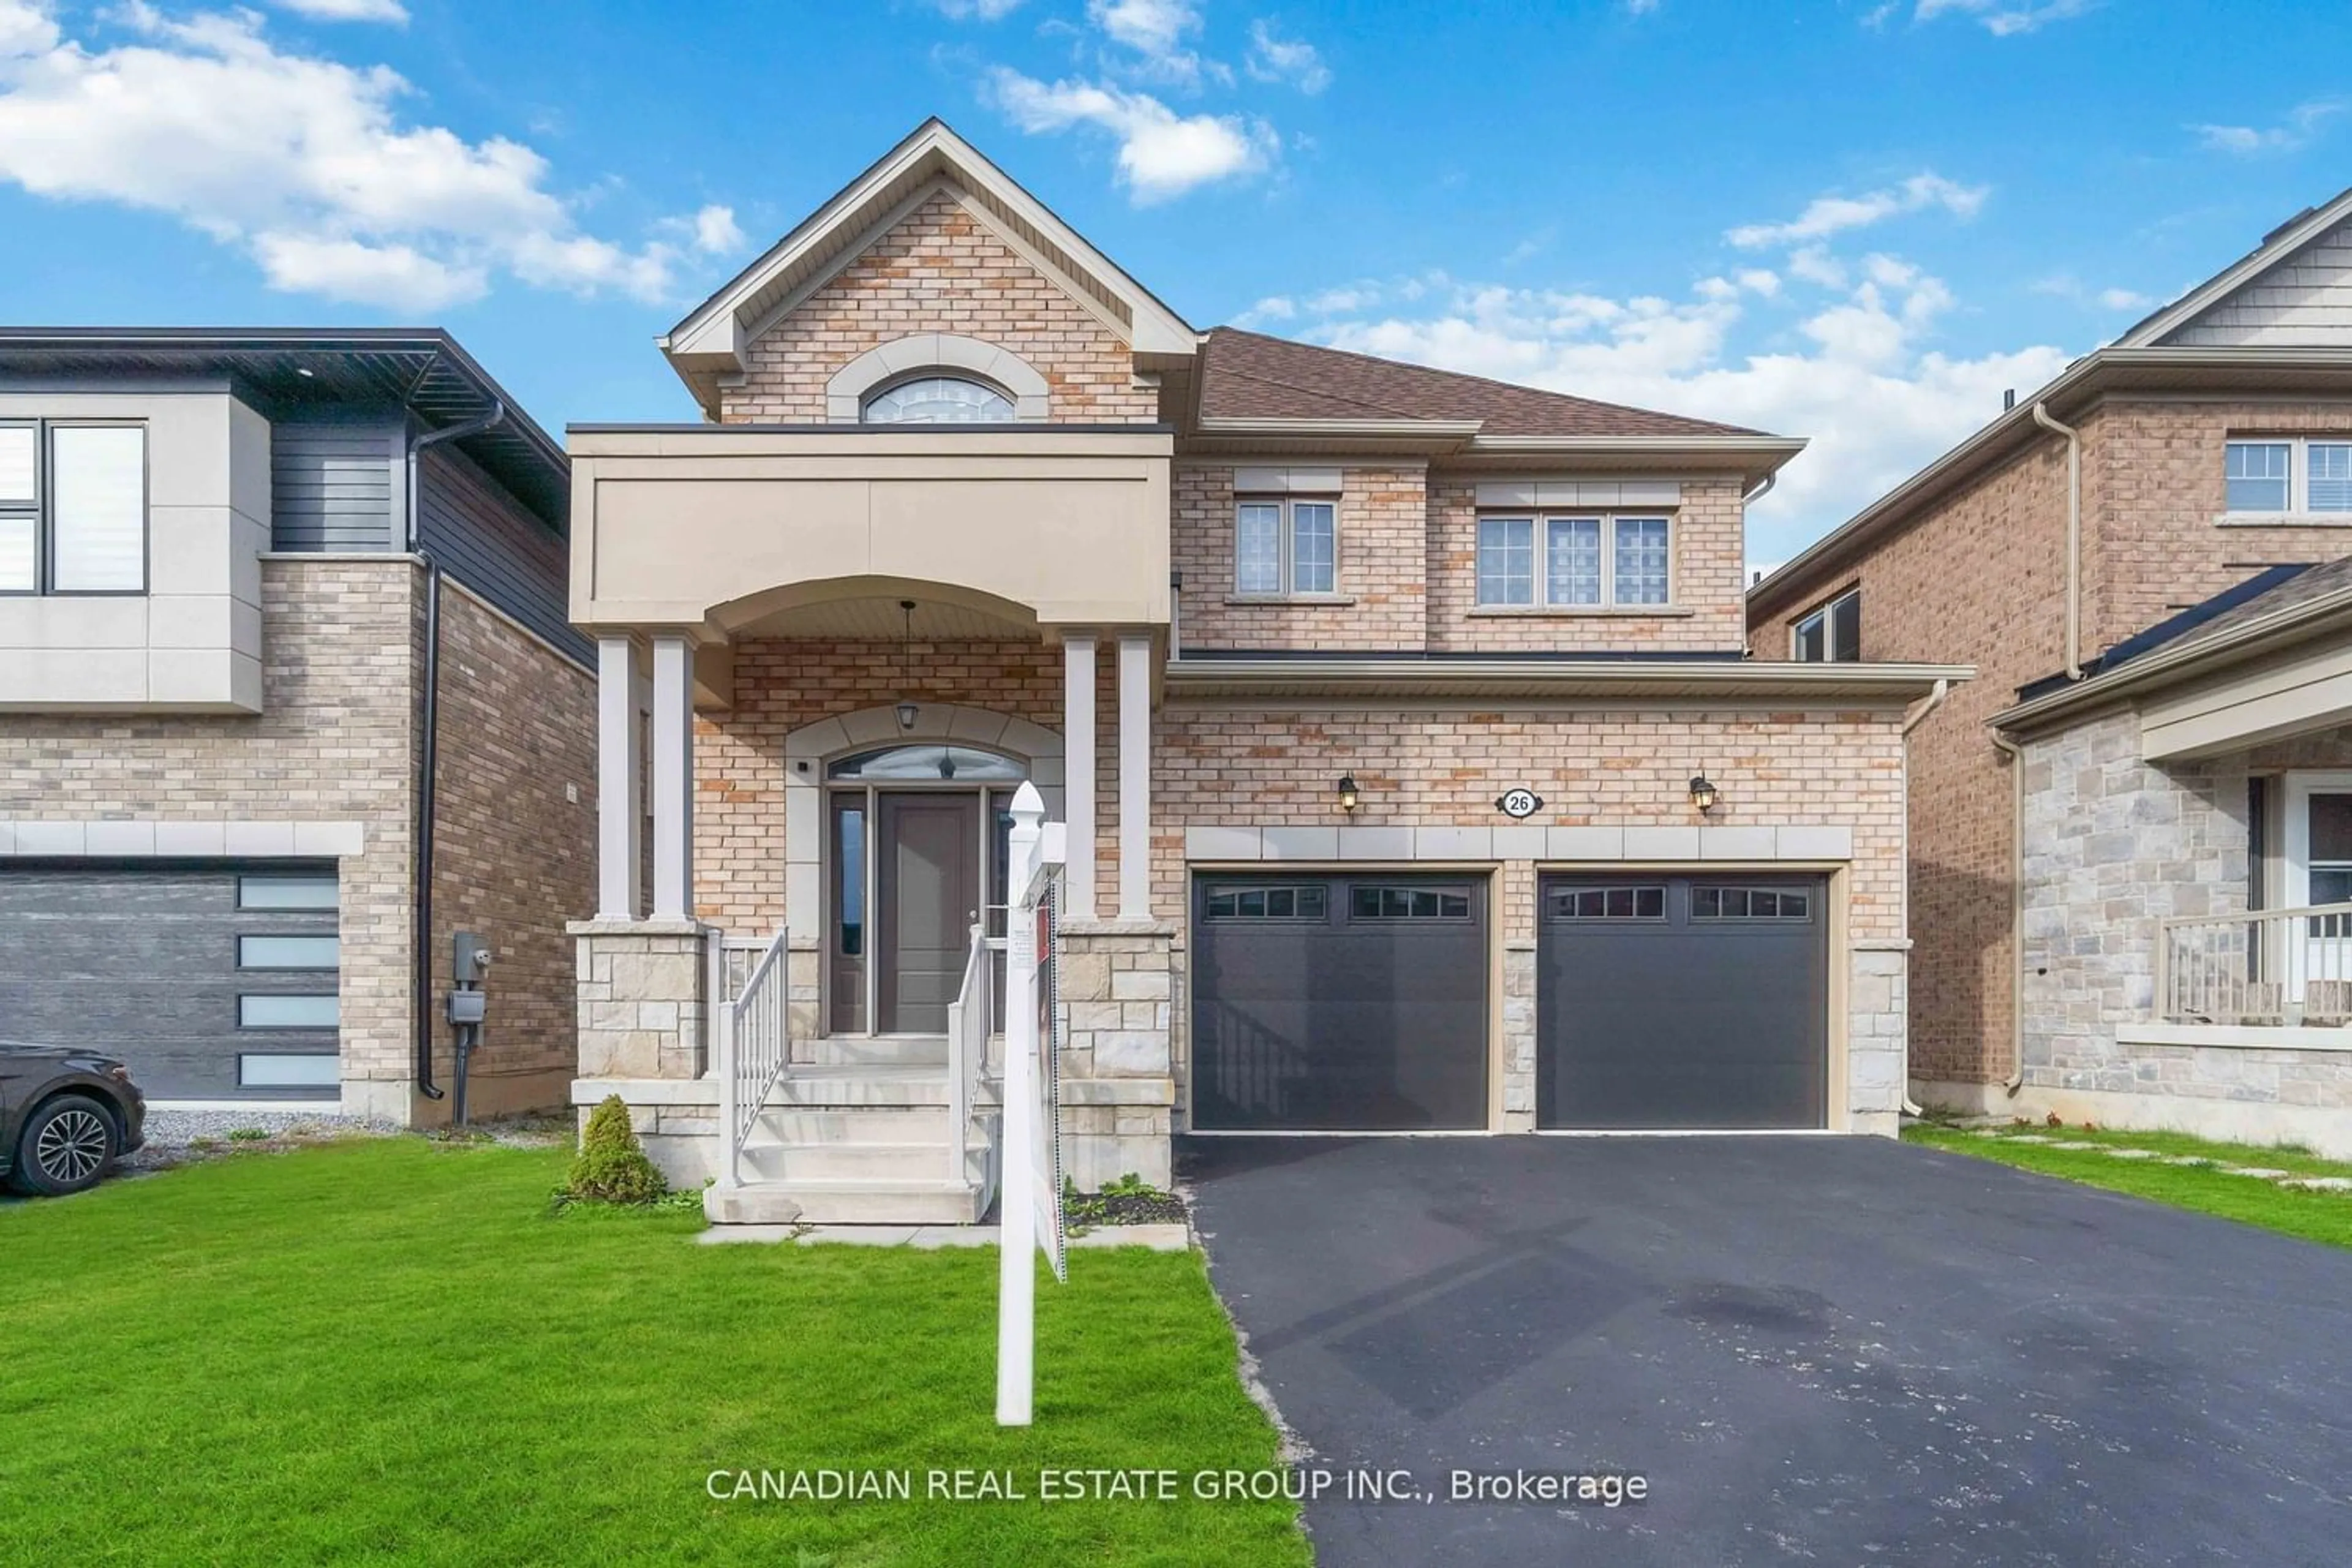 Frontside or backside of a home for 26 Sparkle Dr, Thorold Ontario L0S 1A0